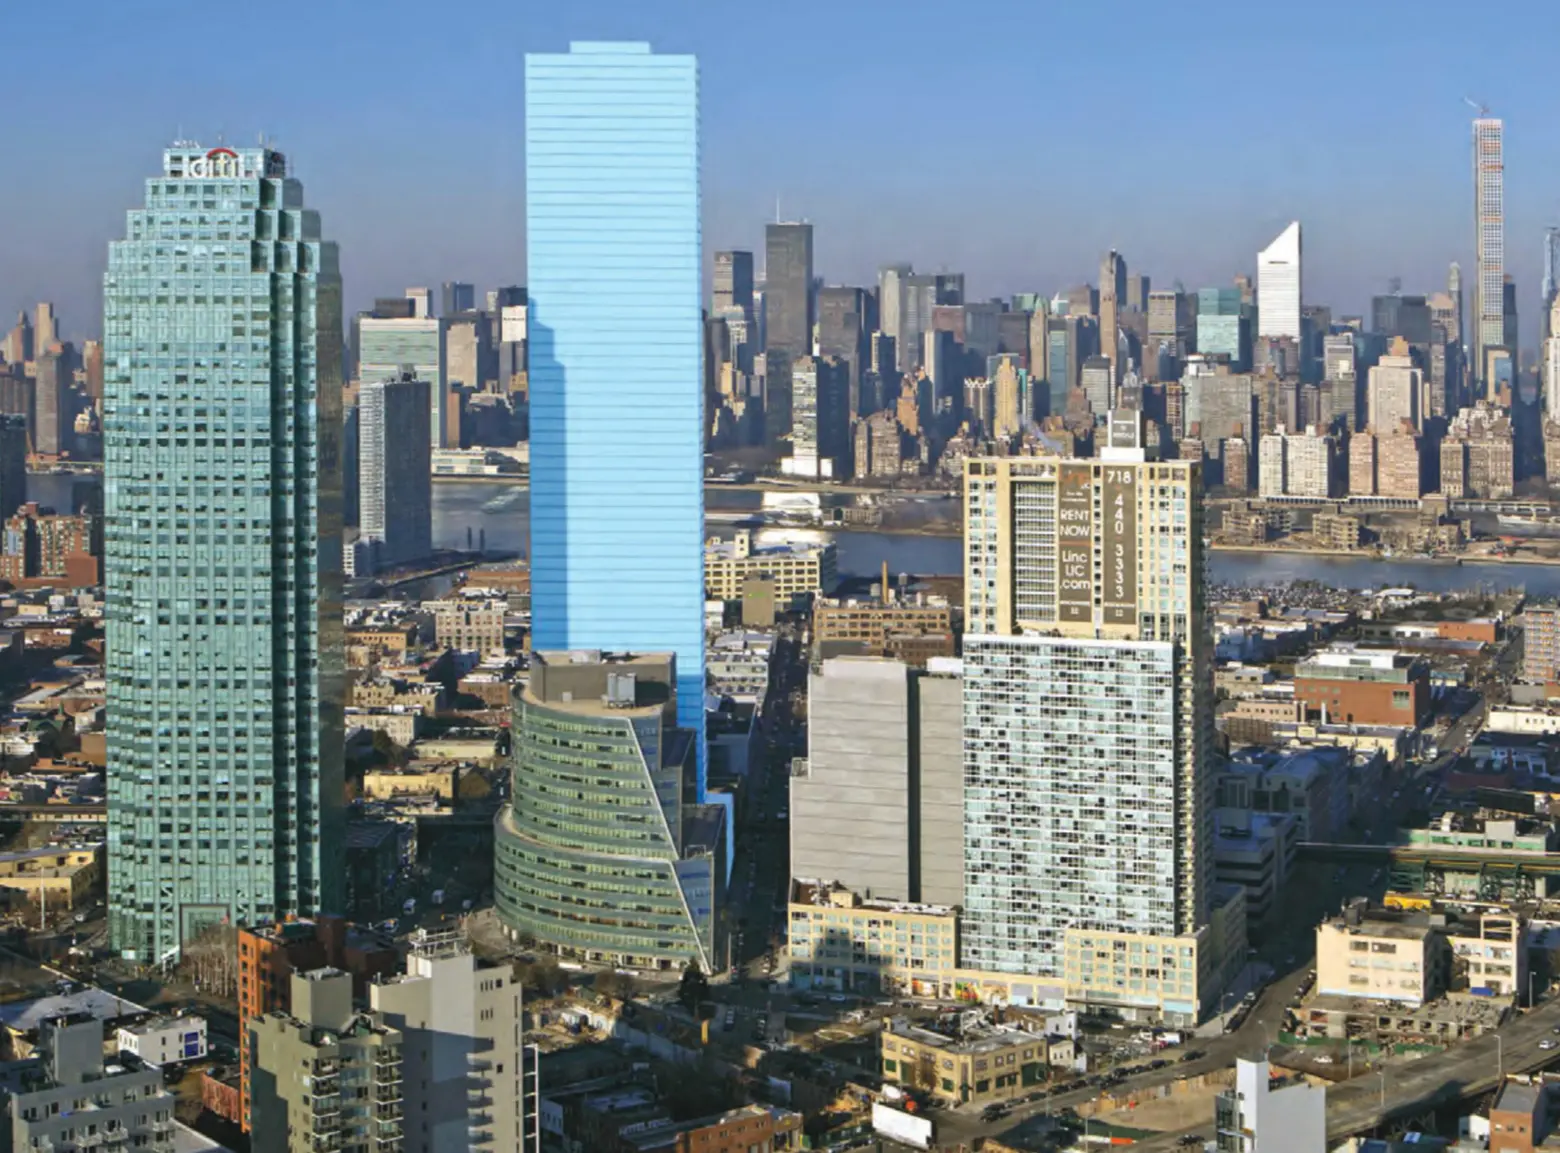 Court Square City View Tower, 23-15 44th Drive, Long Island City development, United Construction & Development Group, tallest building in Queens, NYC tallest towers, Goldstein Hill & West Architects